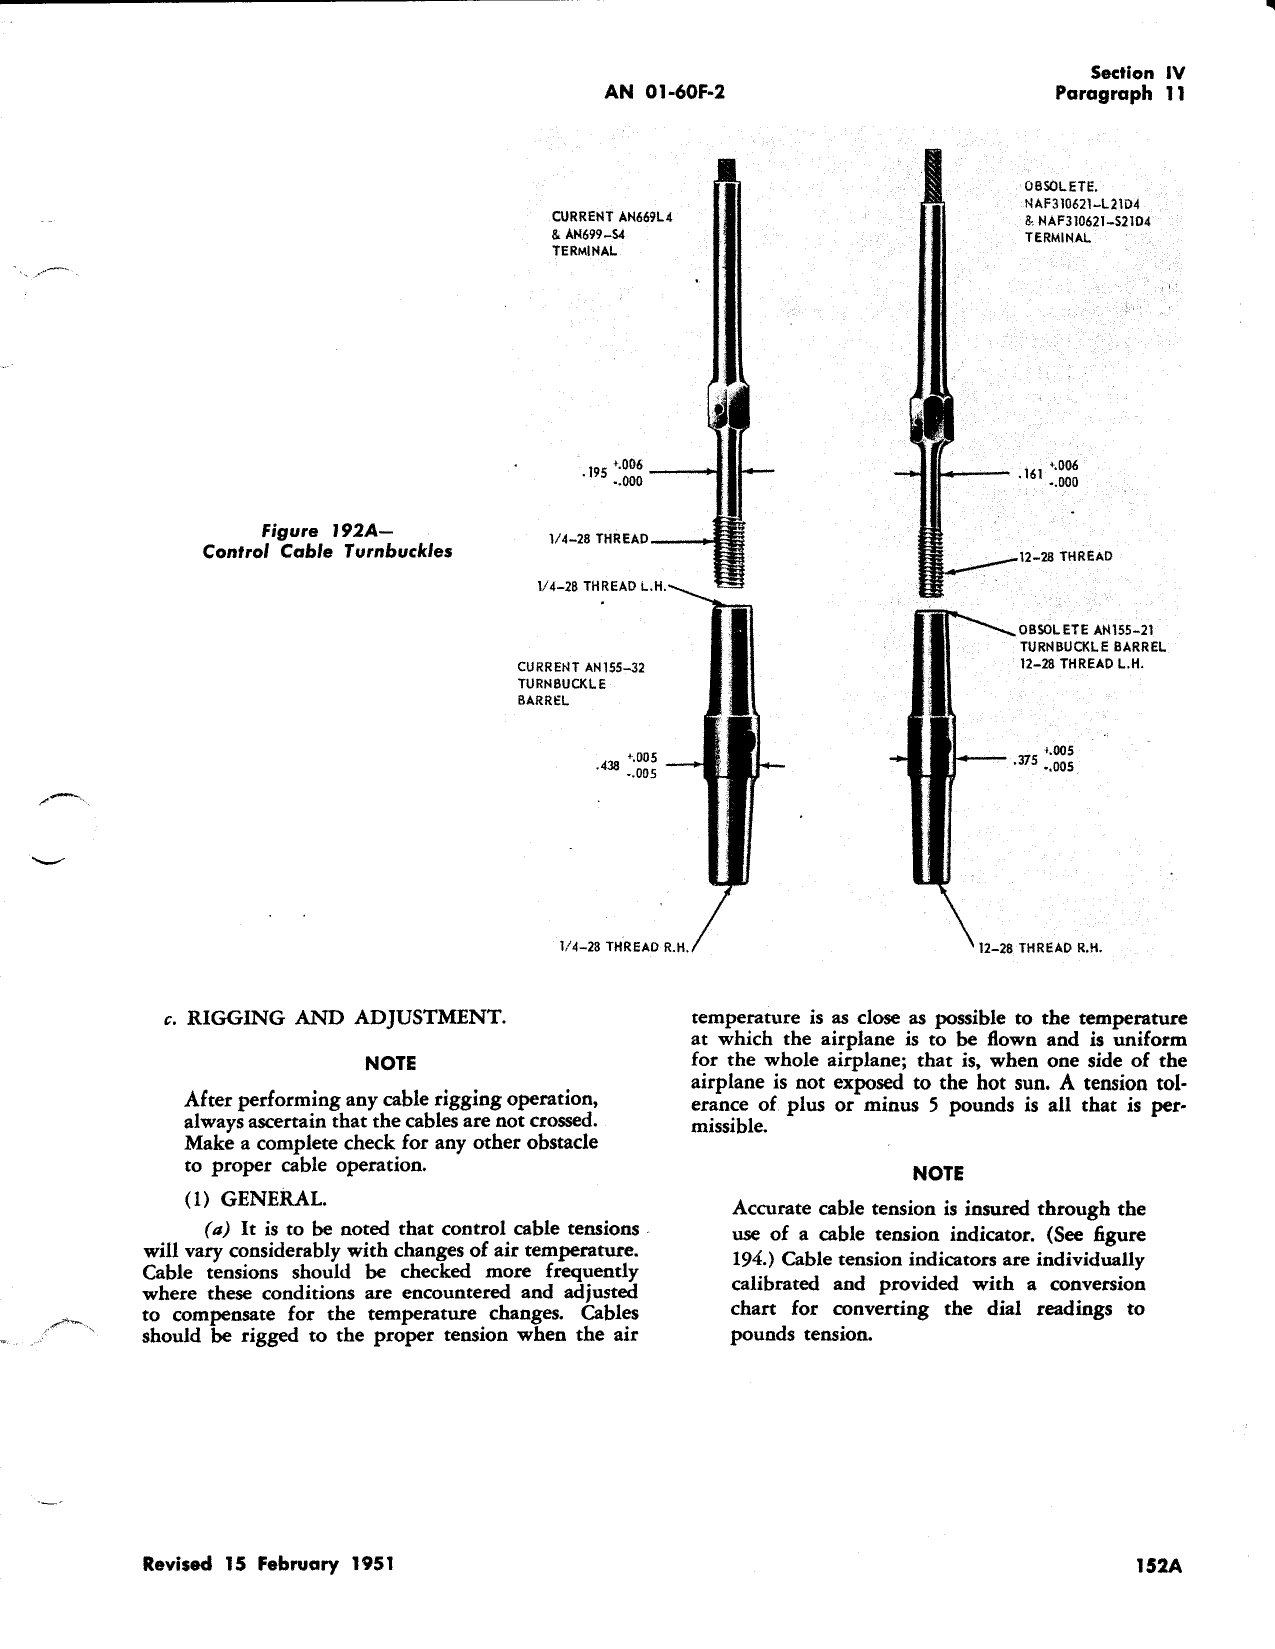 Sample page 5 from AirCorps Library document: Erection and Maintenance Instructions for T-6, SNJ-3, SNJ-4, SNJ-5, and SNJ-6 Aircraft